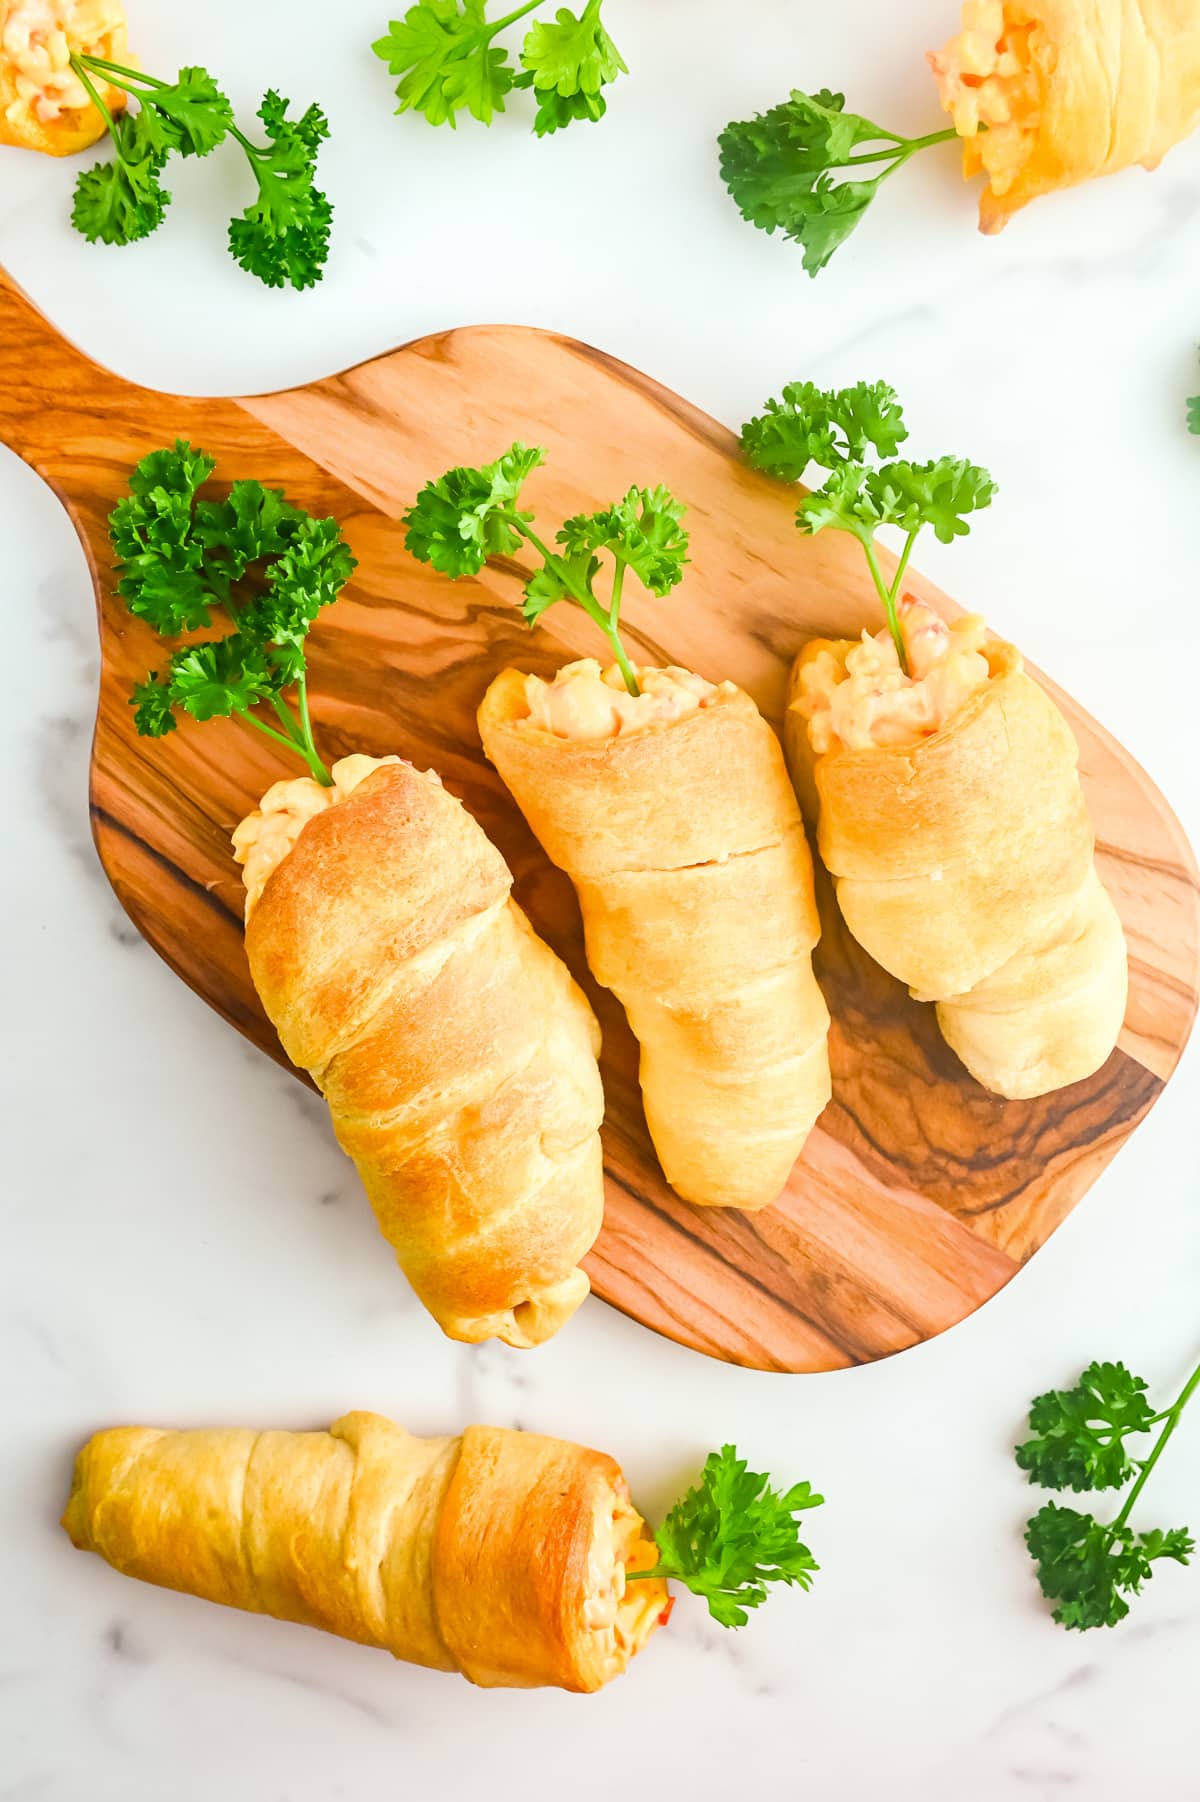 Carrot shaped stuffed crescent rolls on a serving board with parsley carrot tops.